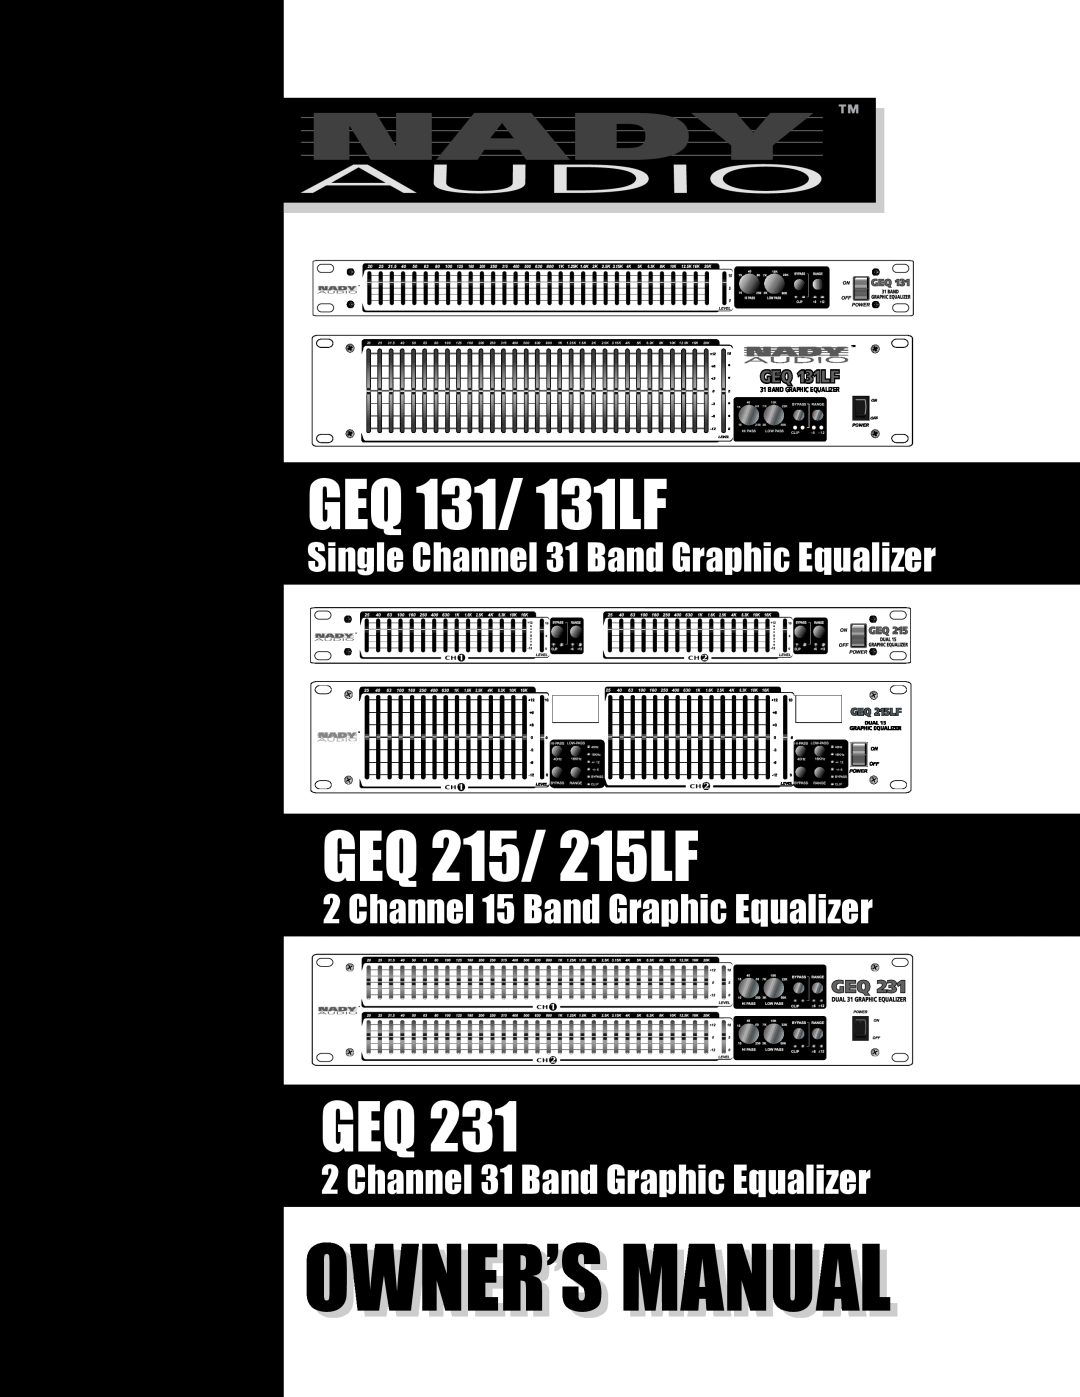 Nady Systems GEQ 131LF owner manual Owner’S’S Manual, GEQ 131/ 131LF, GEQ 215/ 215LF, Channel 15 Band Graphic Equalizer 